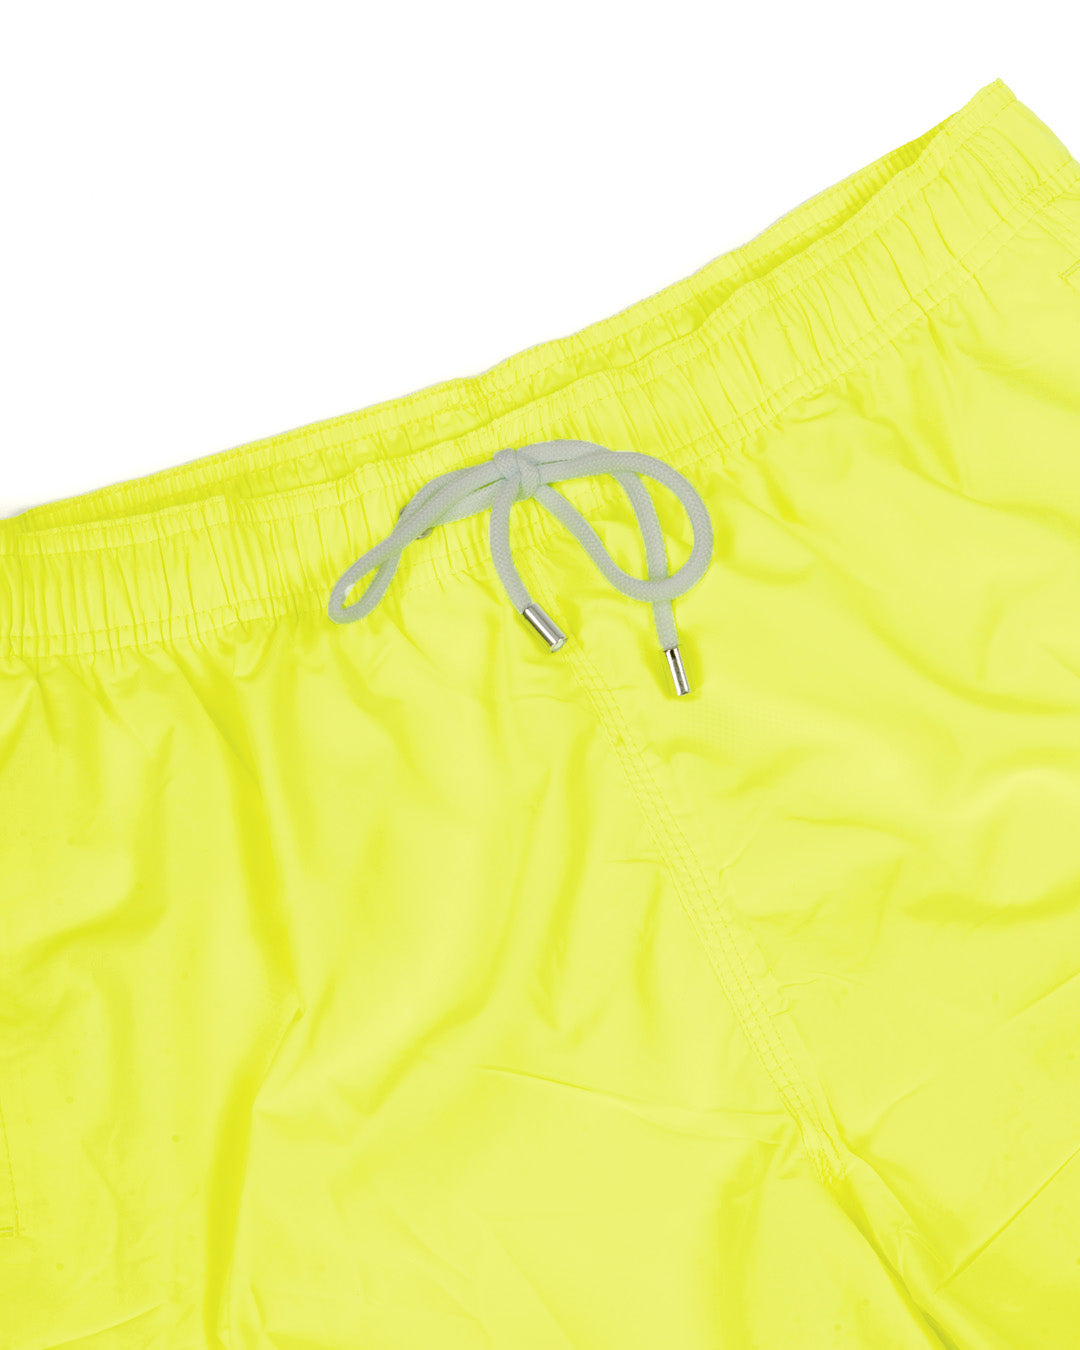 Swimsuit - Solid fluorescent yellow color